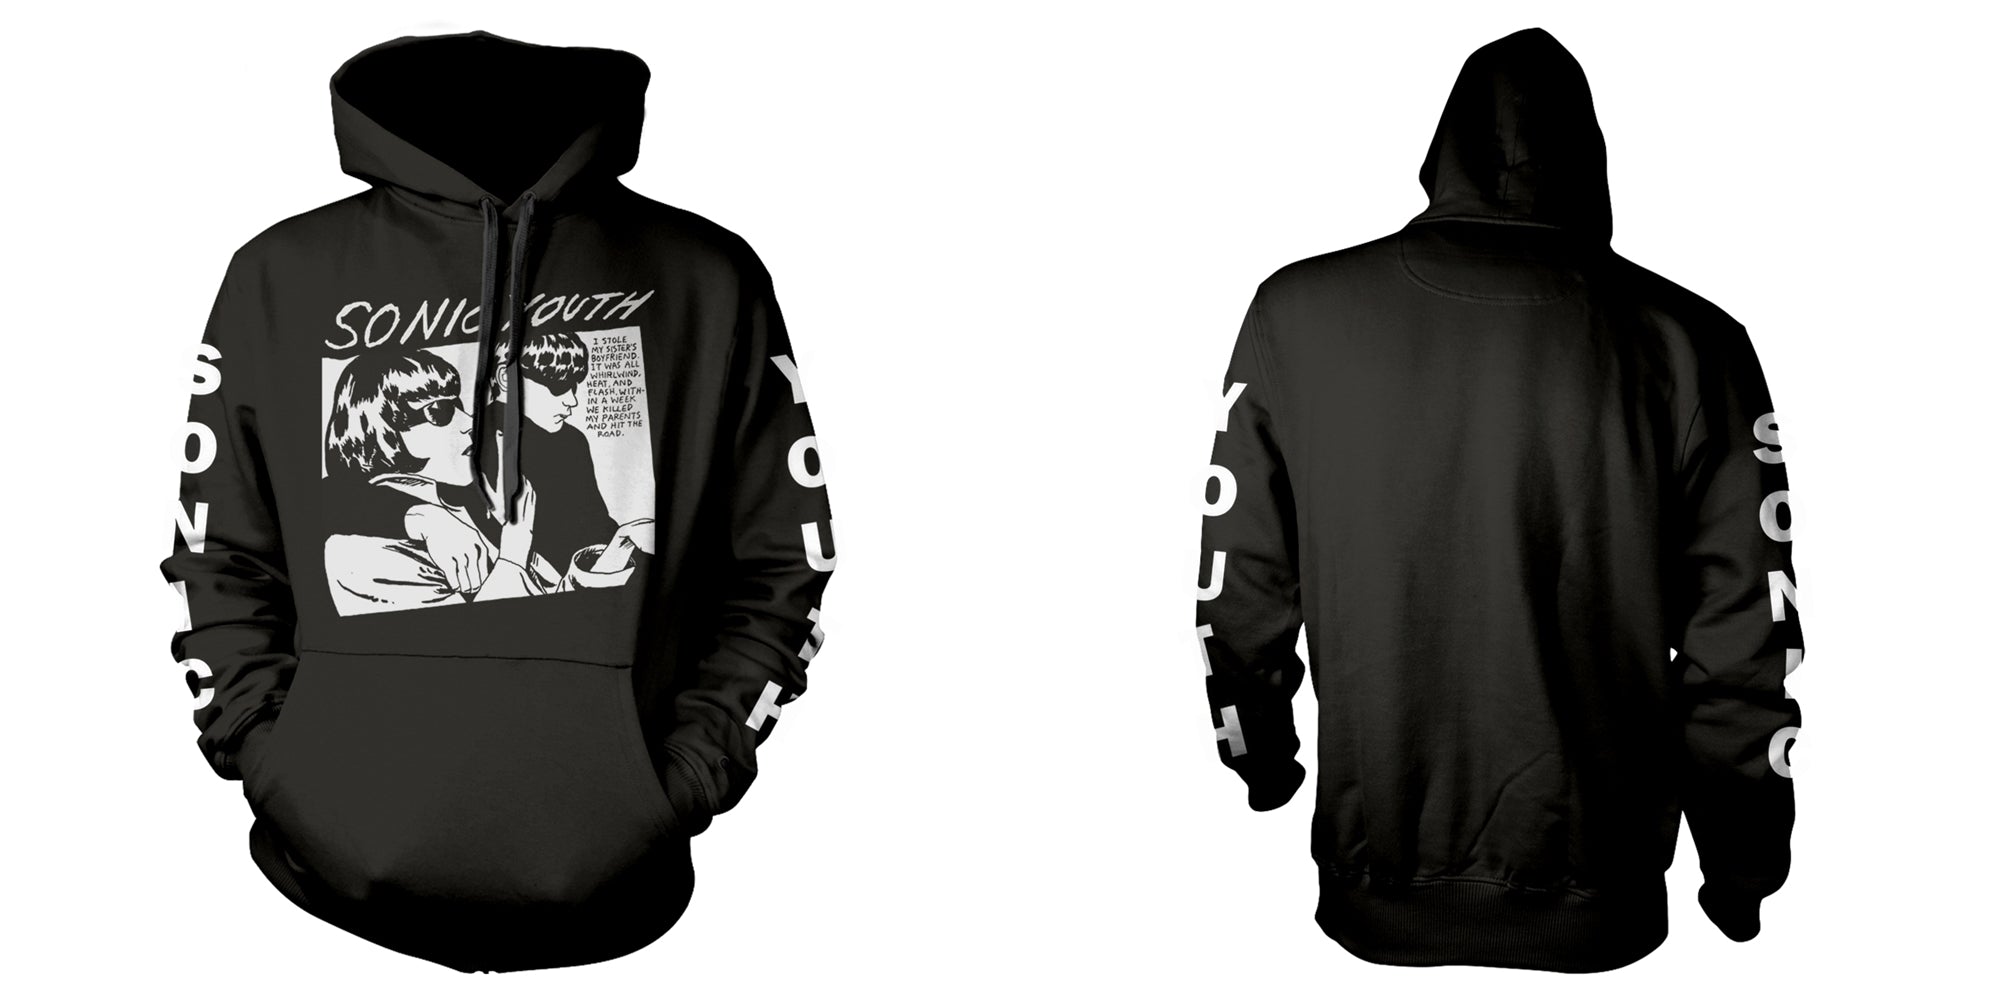 Sonic Youth "Goo" Black Pullover Hoodie with Sleeve Print